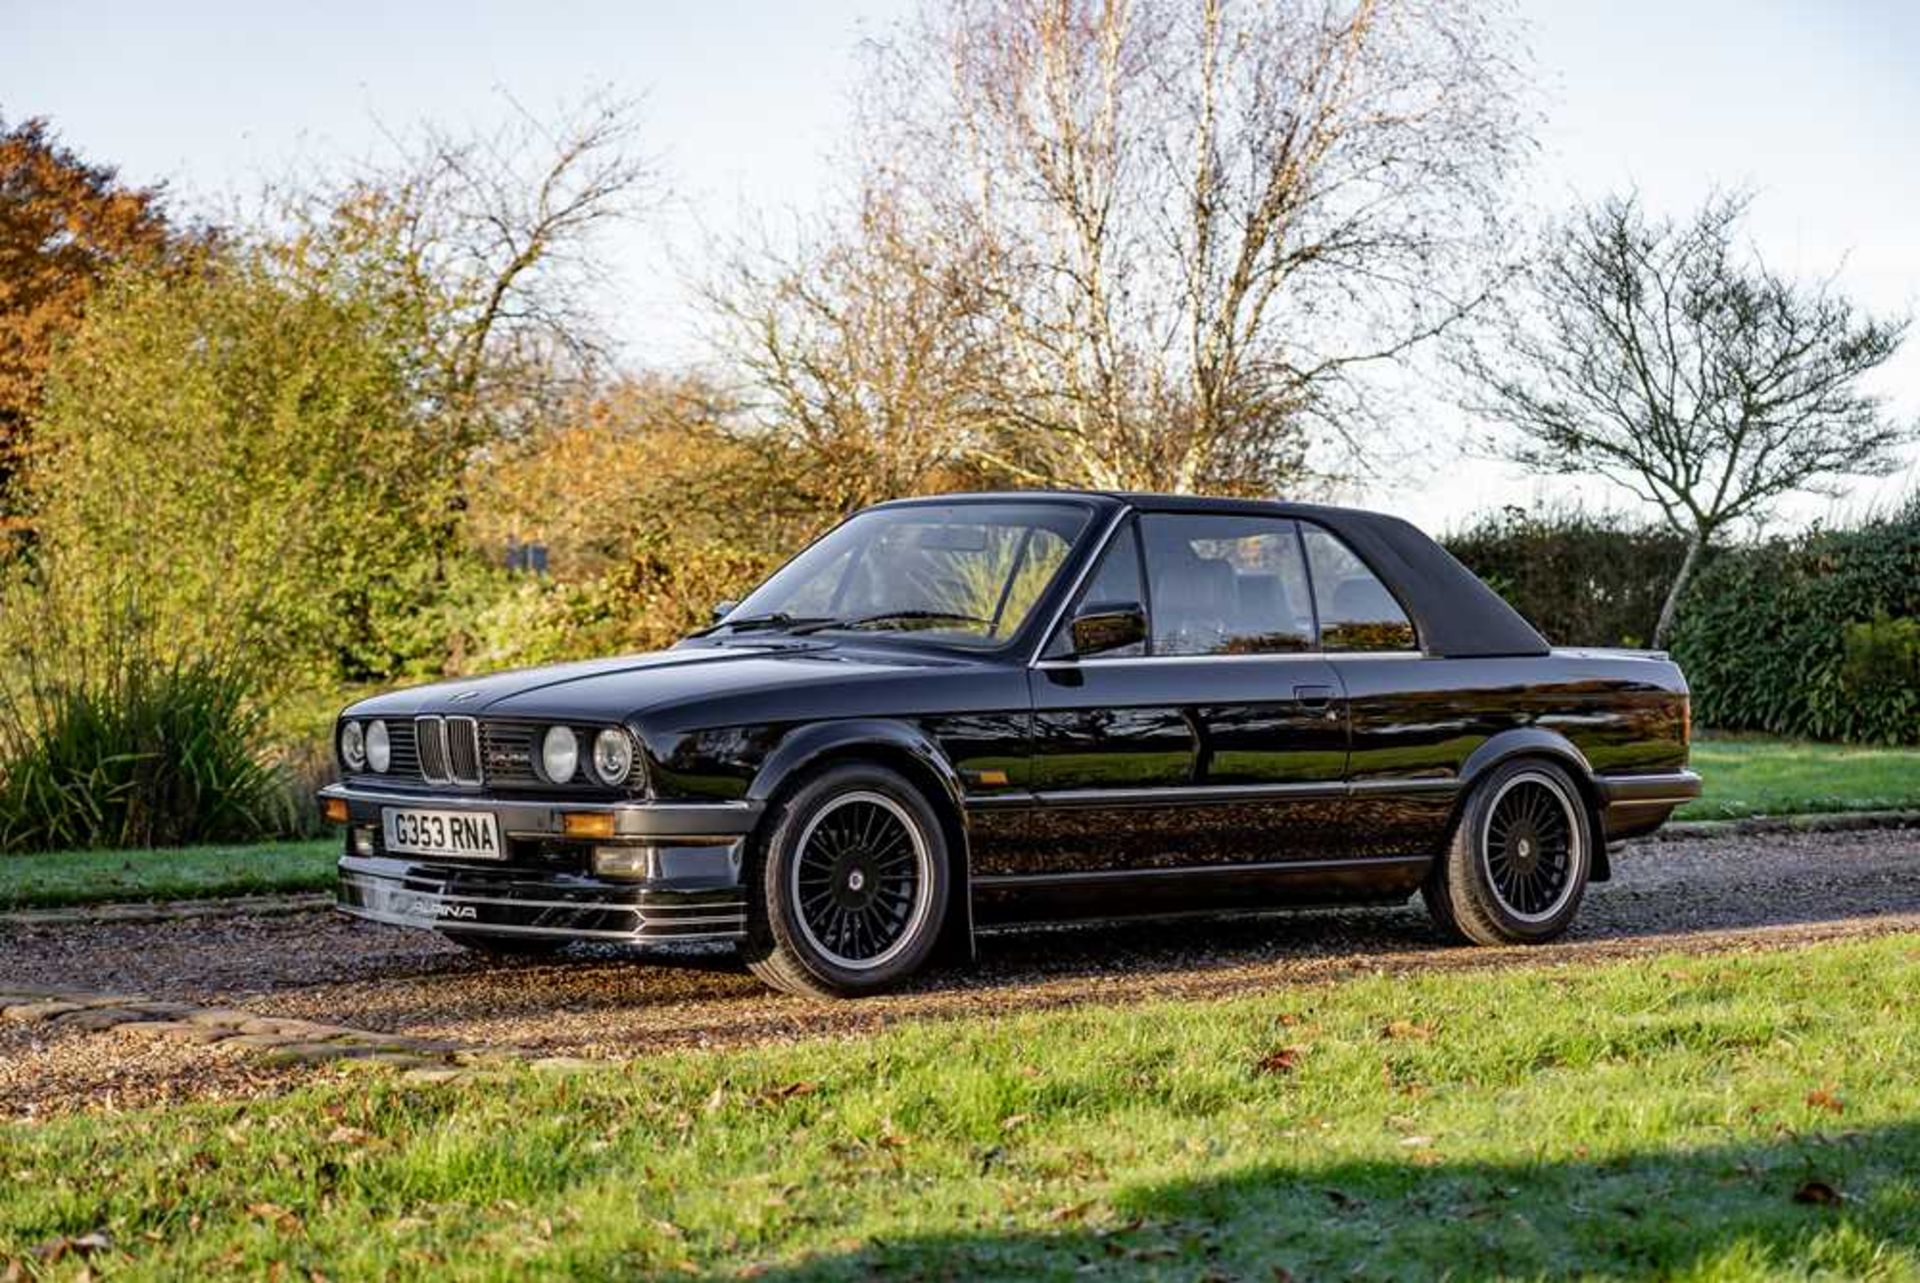 1989 BMW 320i Convertible Converted to Alpina 328i Specification - Image 8 of 51